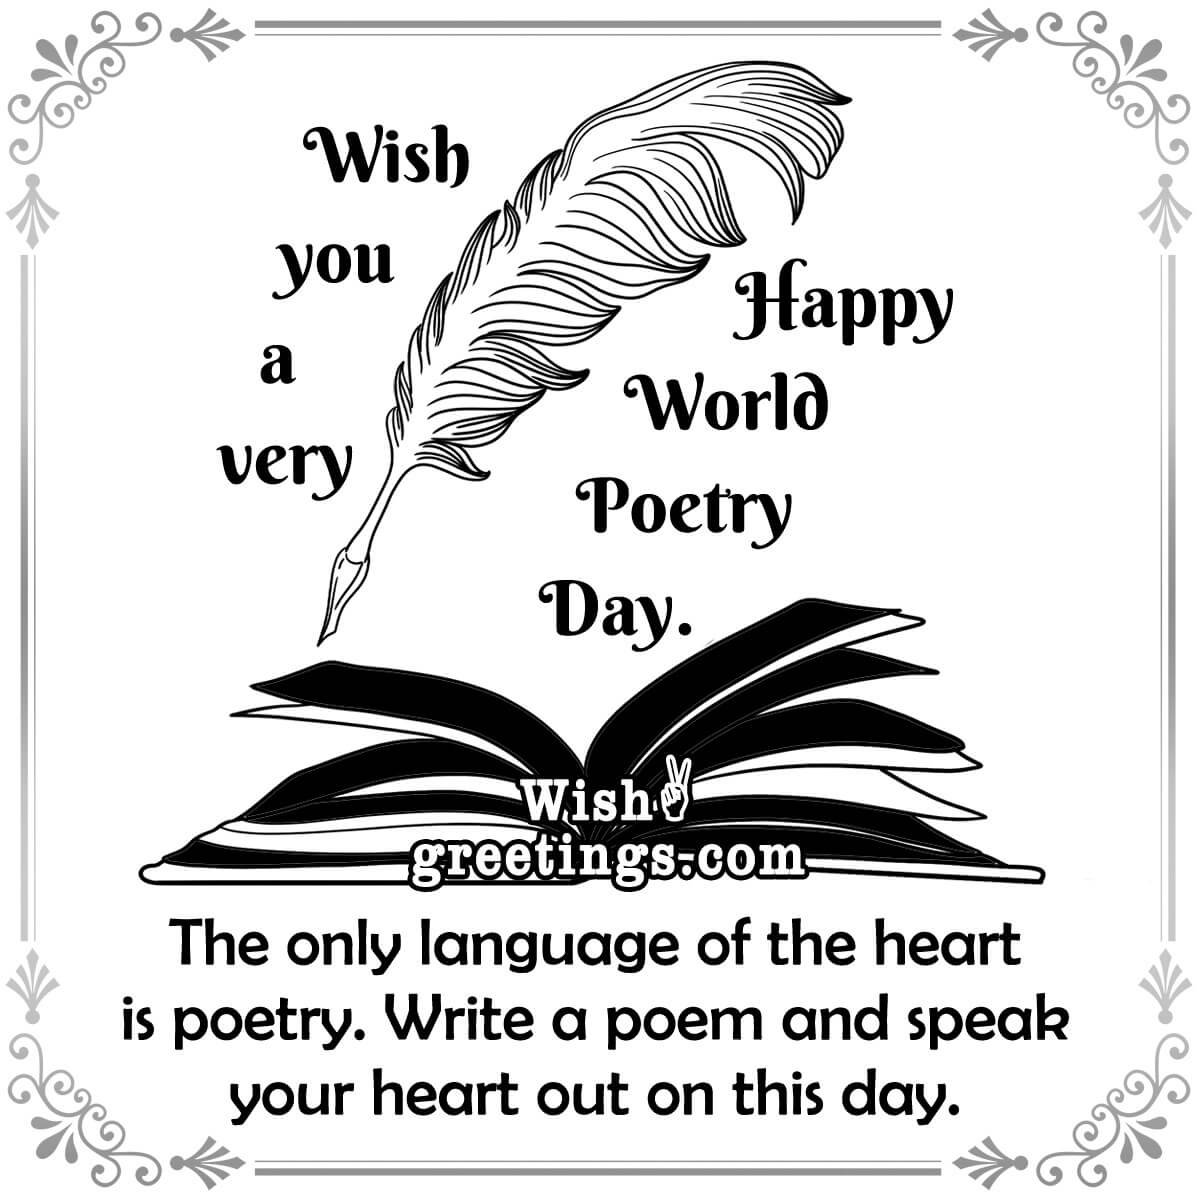 Wish You A Very Happy World Poetry Day